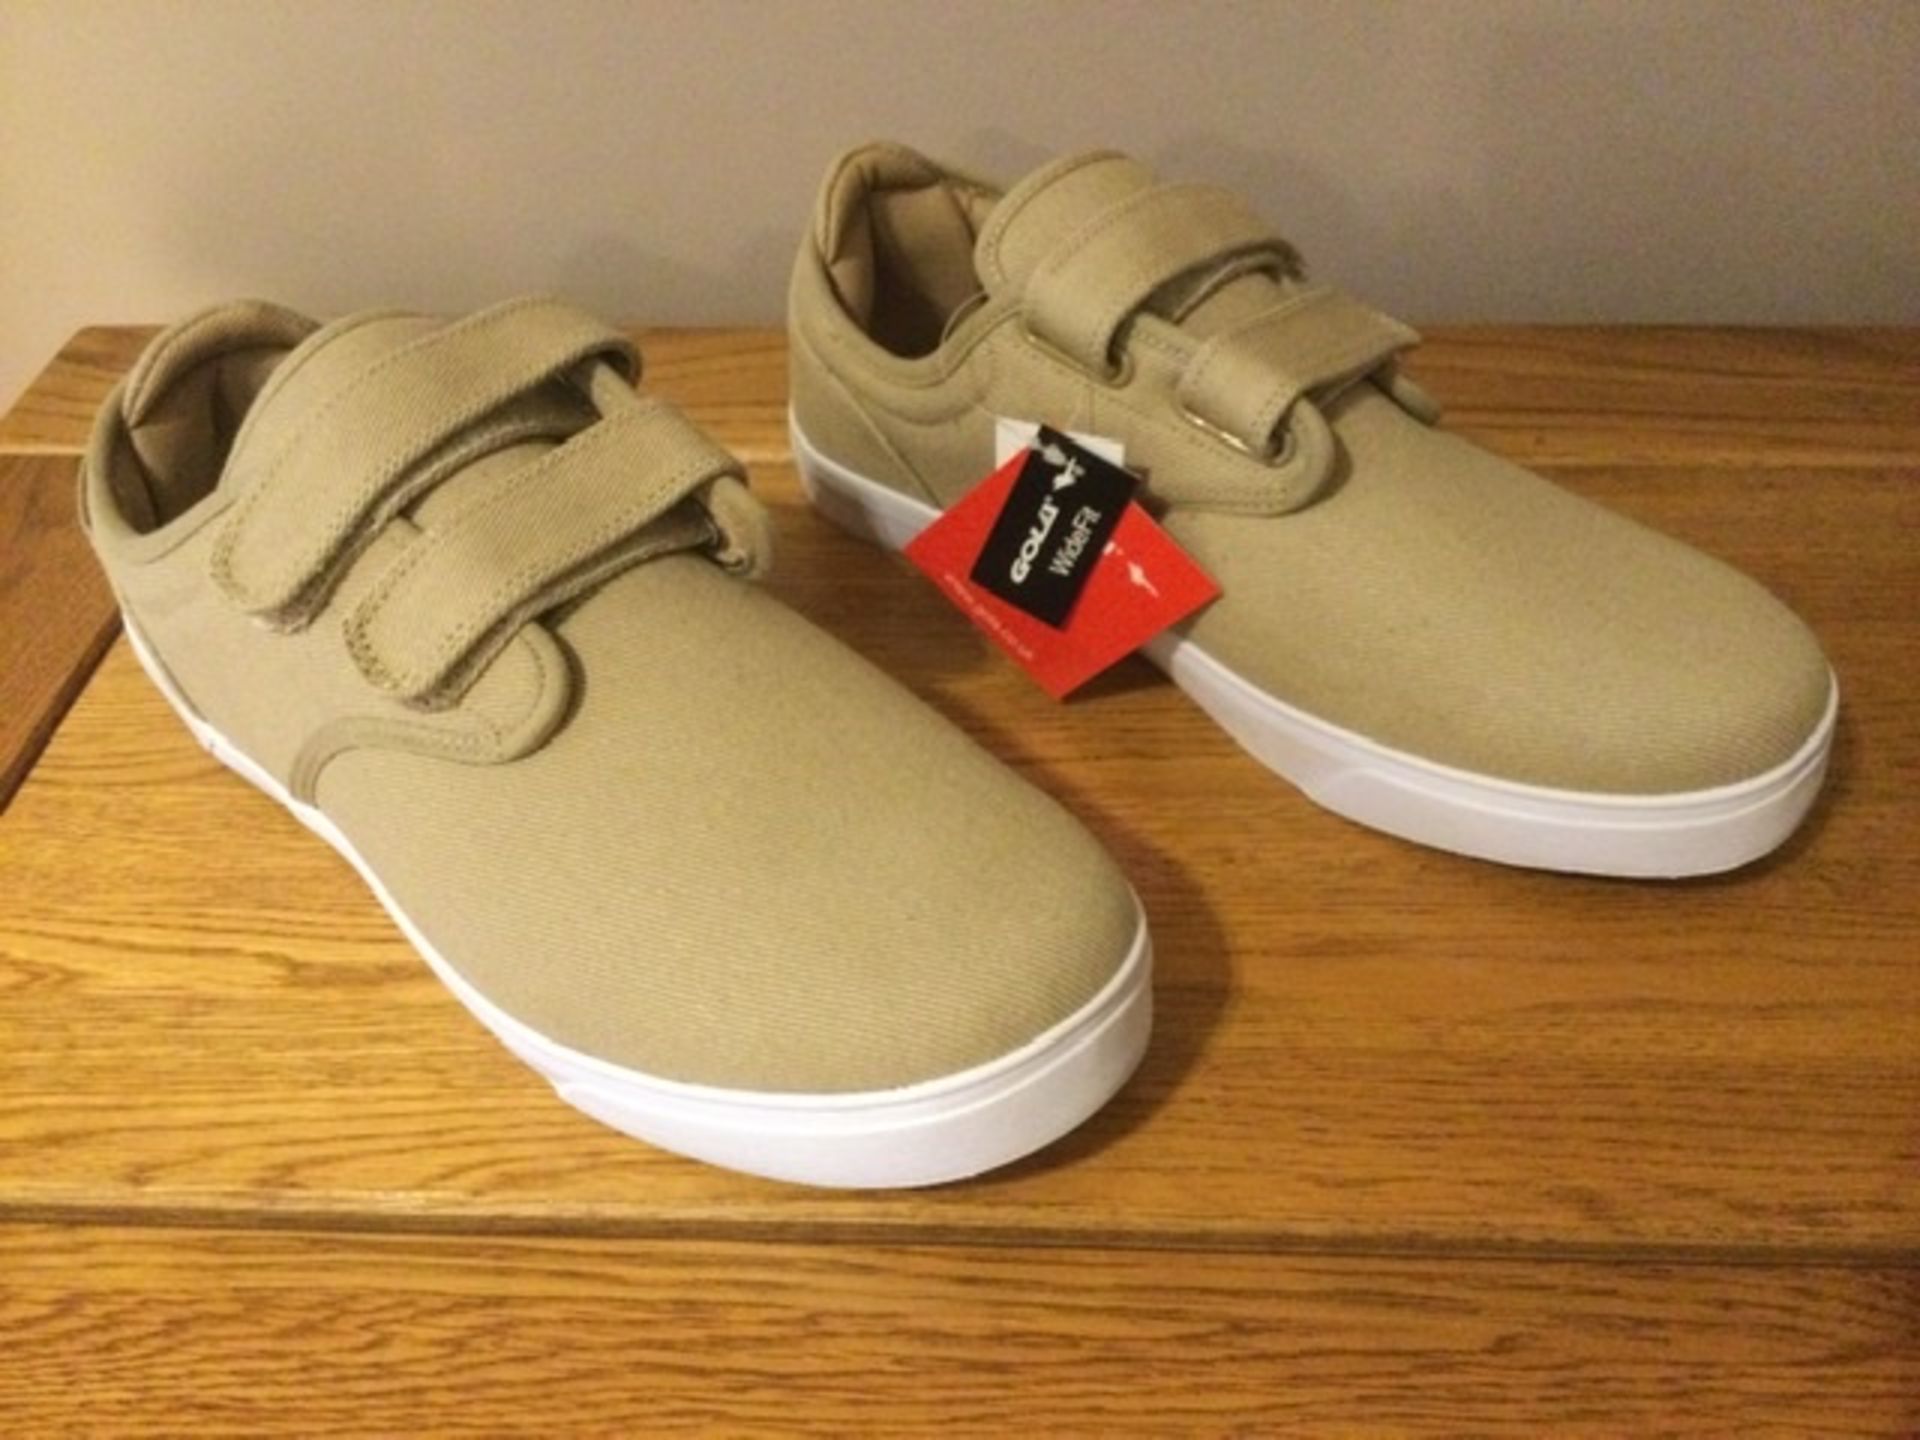 Gola “Panama” QF Men's Wide Fit Trainers, Size 8, Taupe/White - New RRP £36.00 - Image 3 of 5